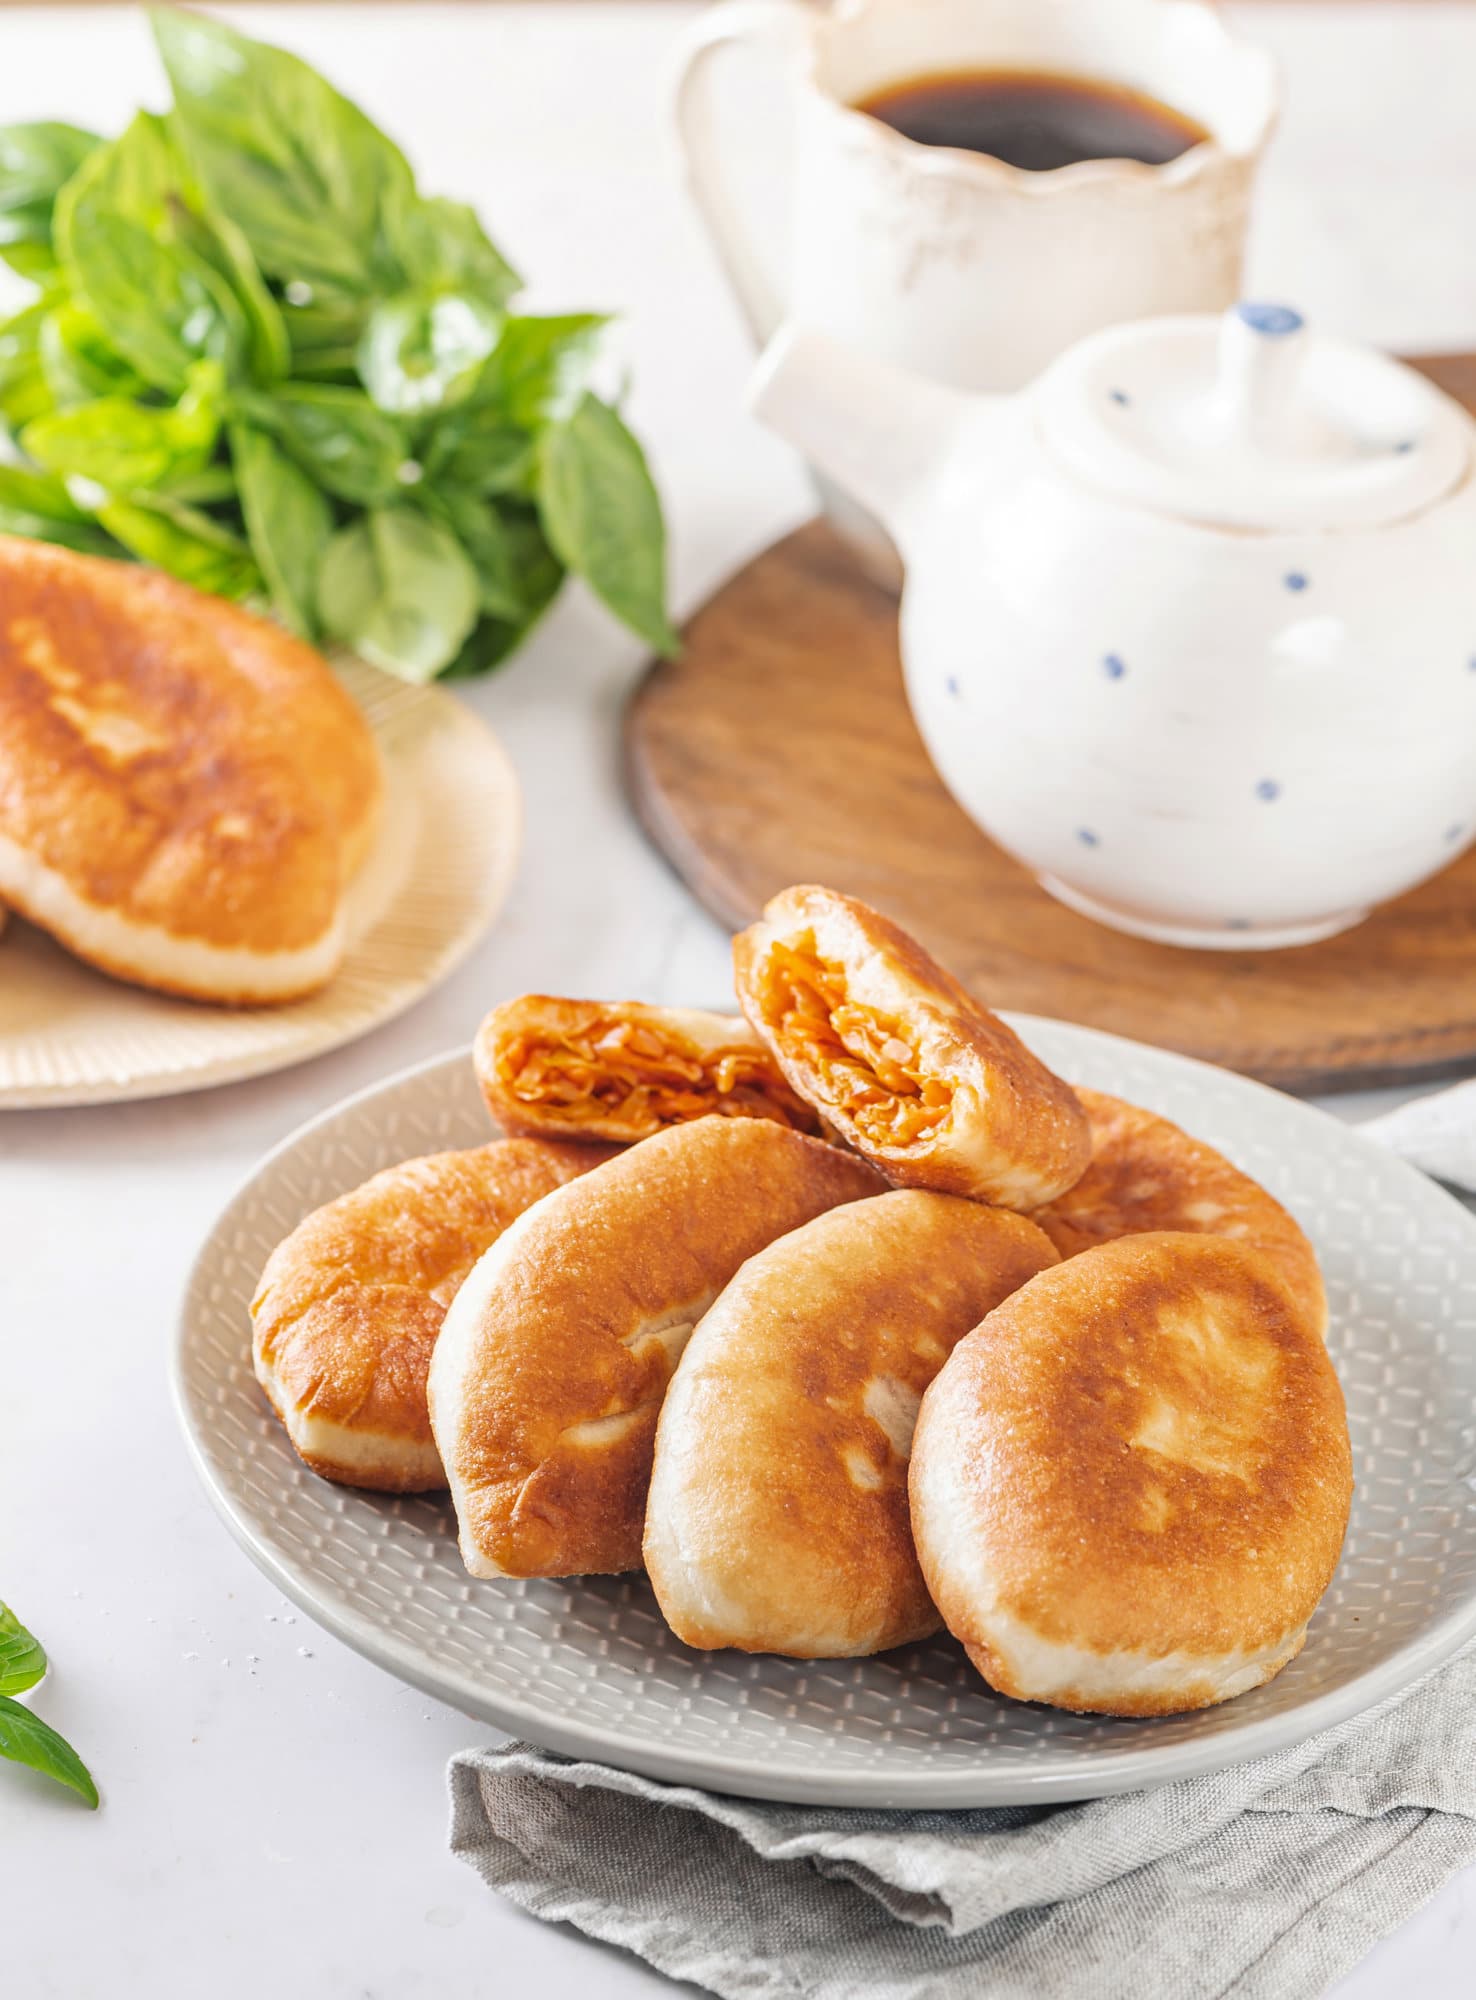 piroshki-with-cabbage-on-a-white-speckled-plate-with-a-teapot-and-a-mug-of-tea-in-the-background-on-a-wooden-board